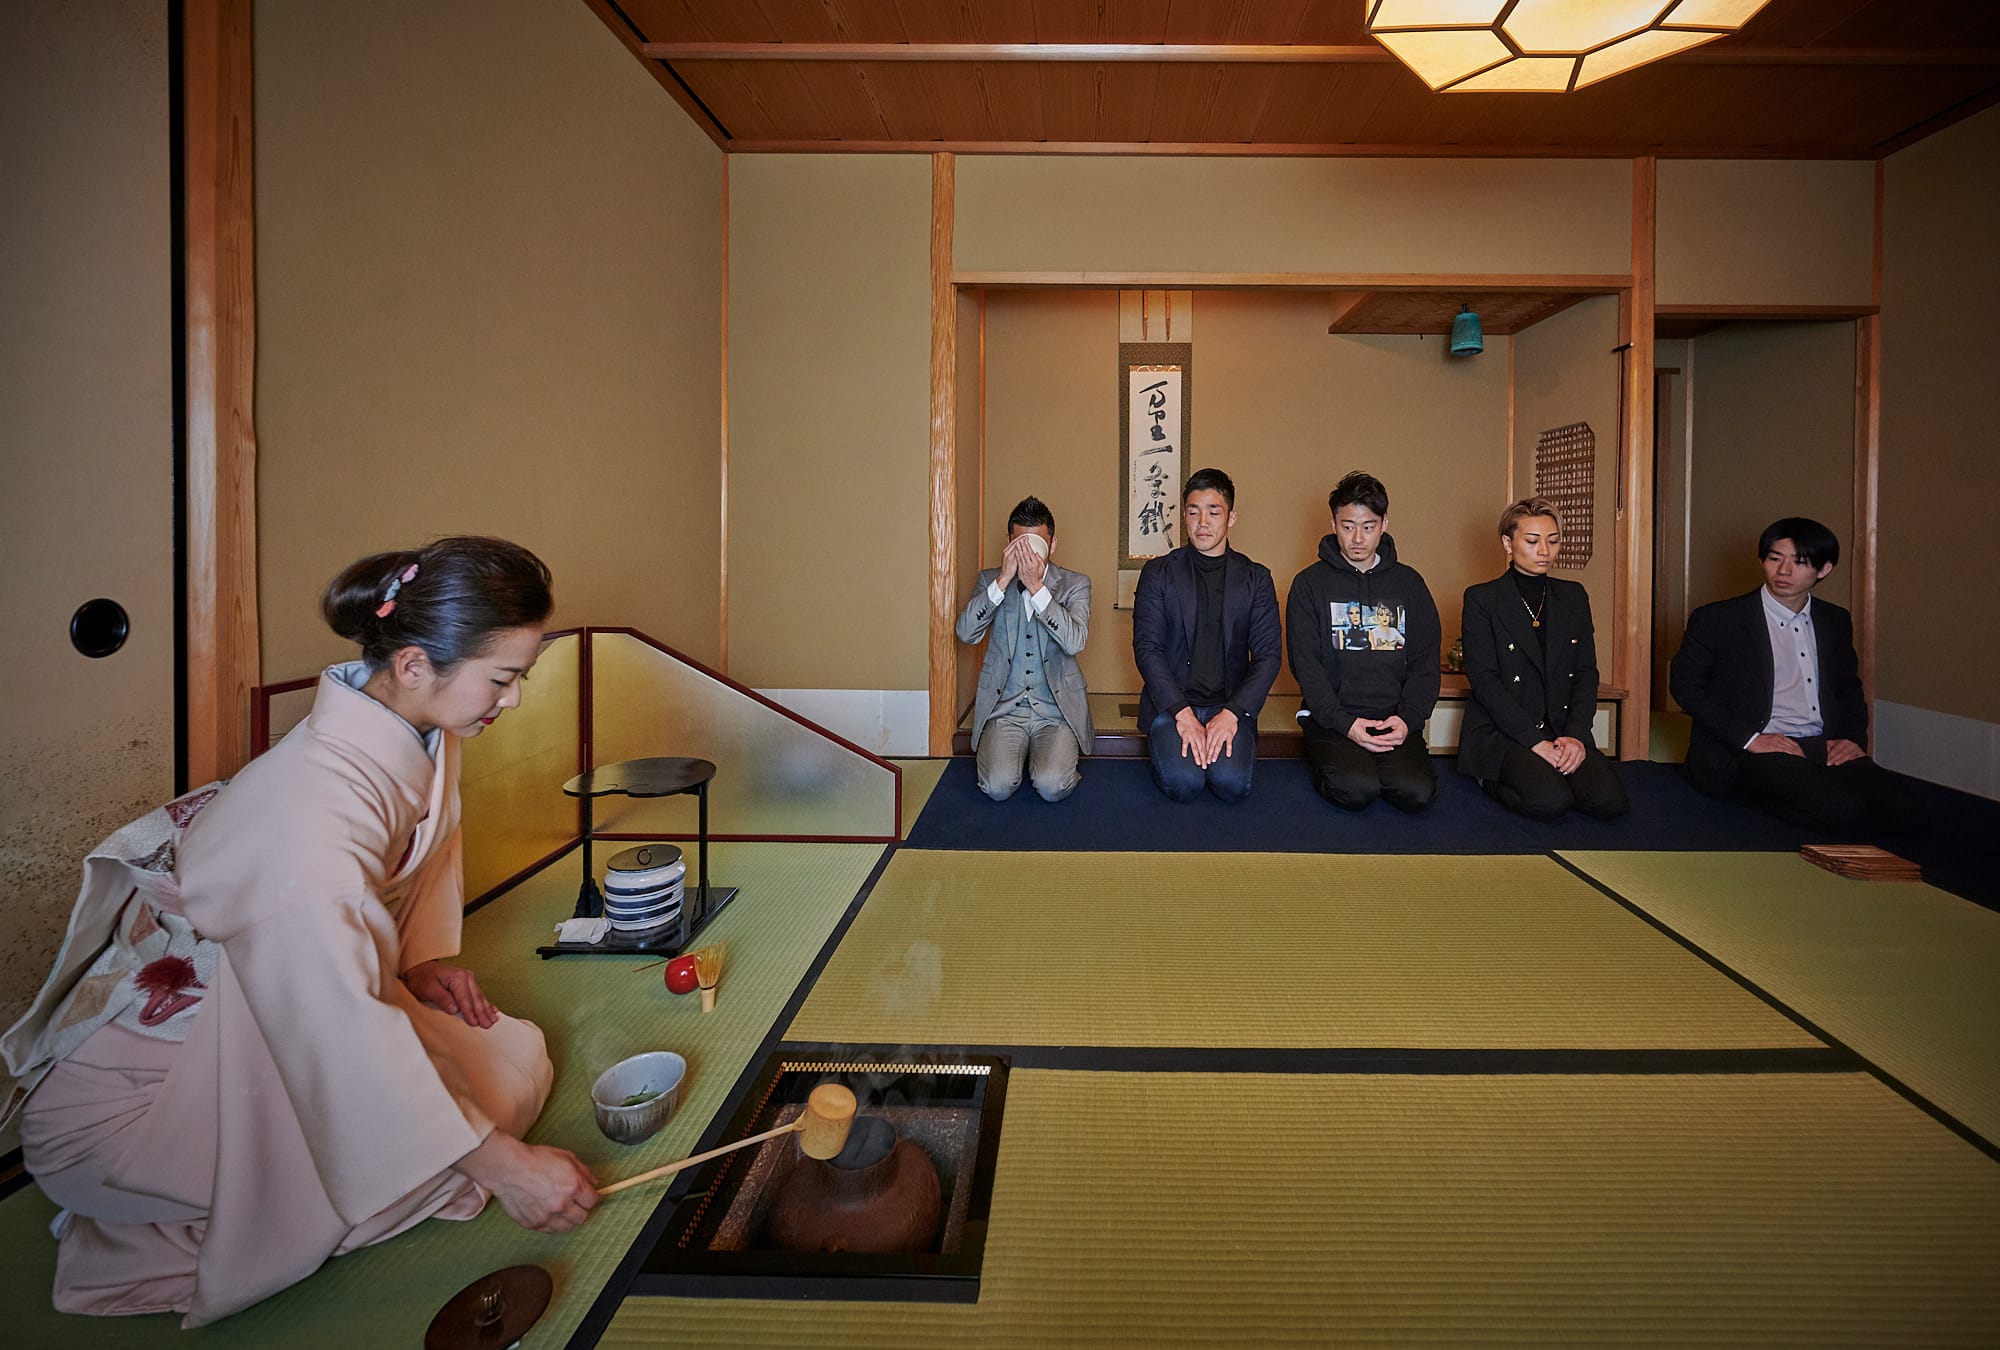 The athlete tea ceremony became a place where athletes from different sports discovered similarities in each other.